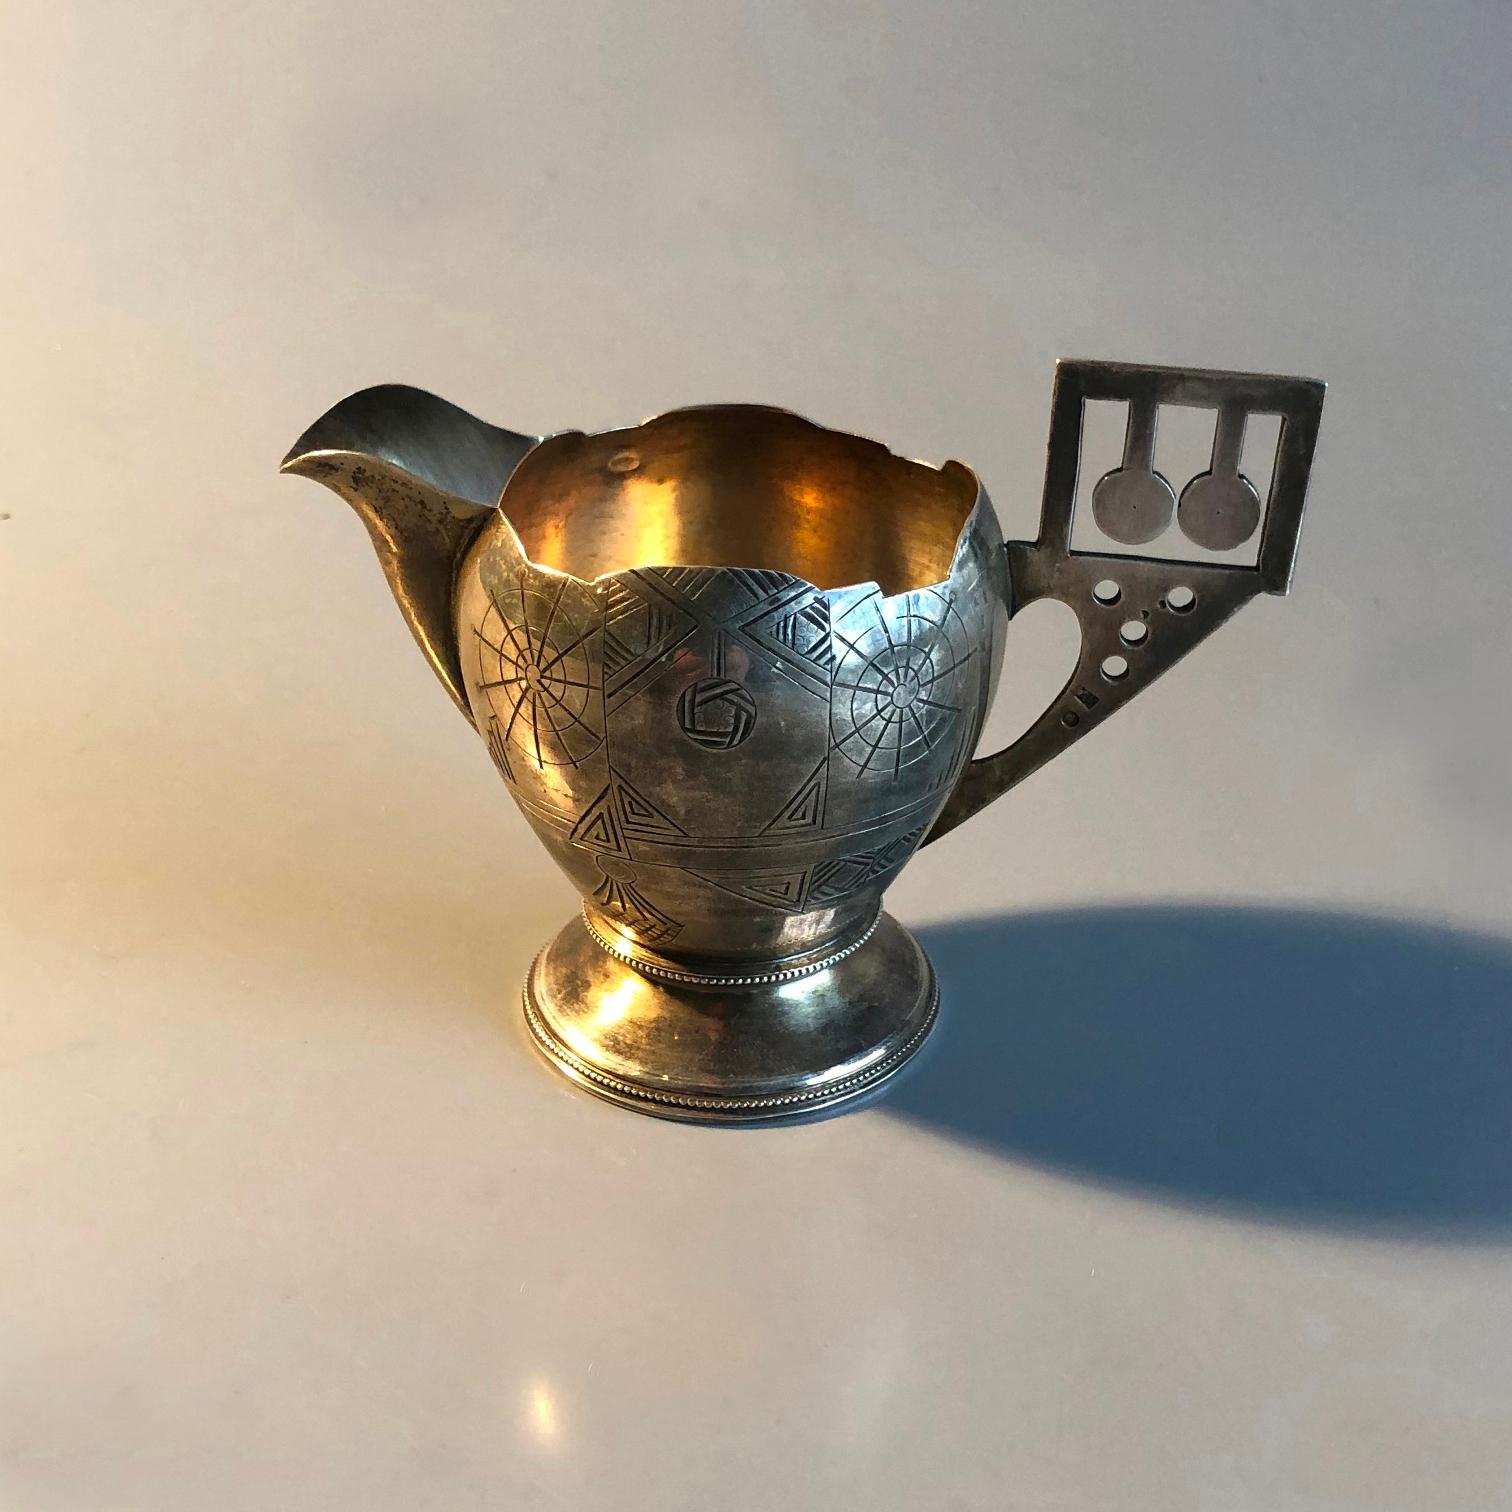 Art Nouveau Antique Imperial 84 Silver Engraved Creamer by Antip Kuzmichev, Russia, 1900s For Sale